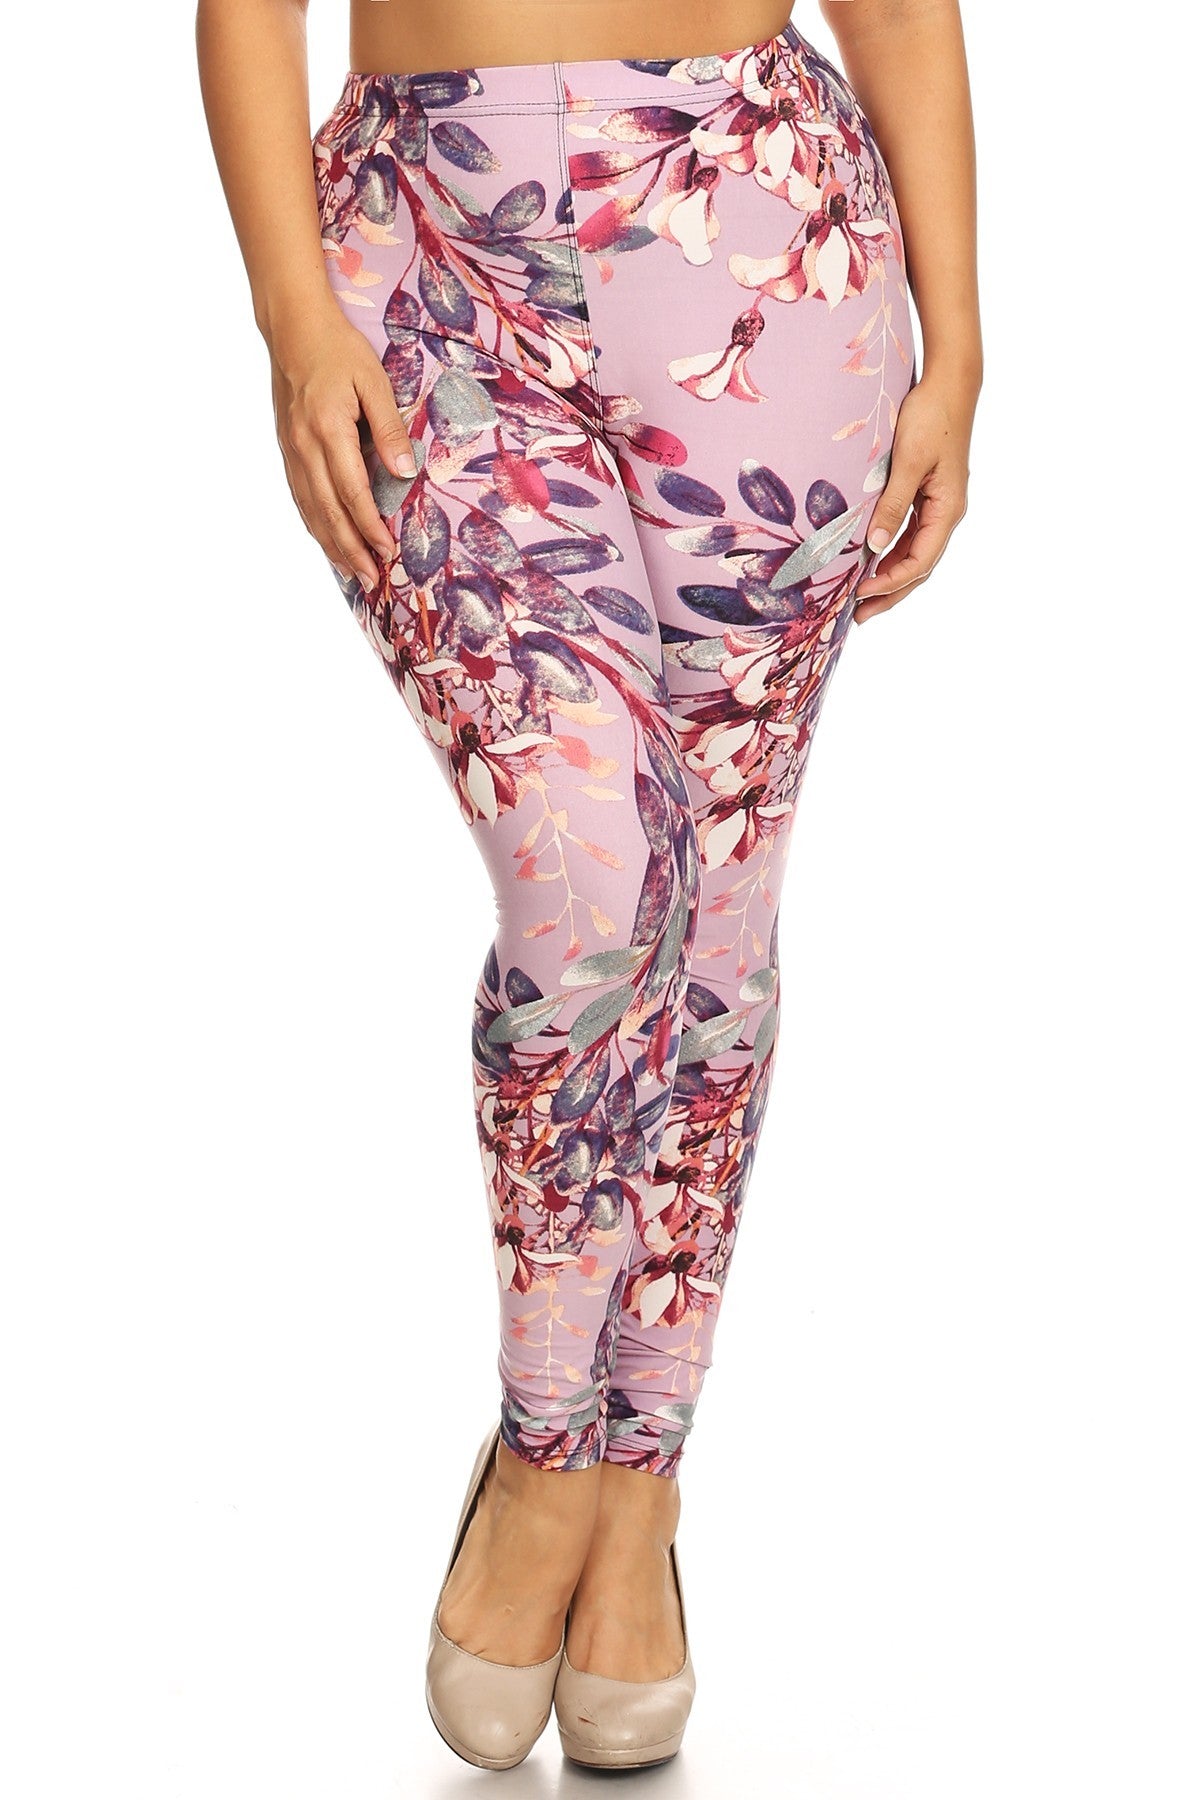 NWT Balance Collection Marling Floral Print Hi-Rise Leggings Size XL White  Blue